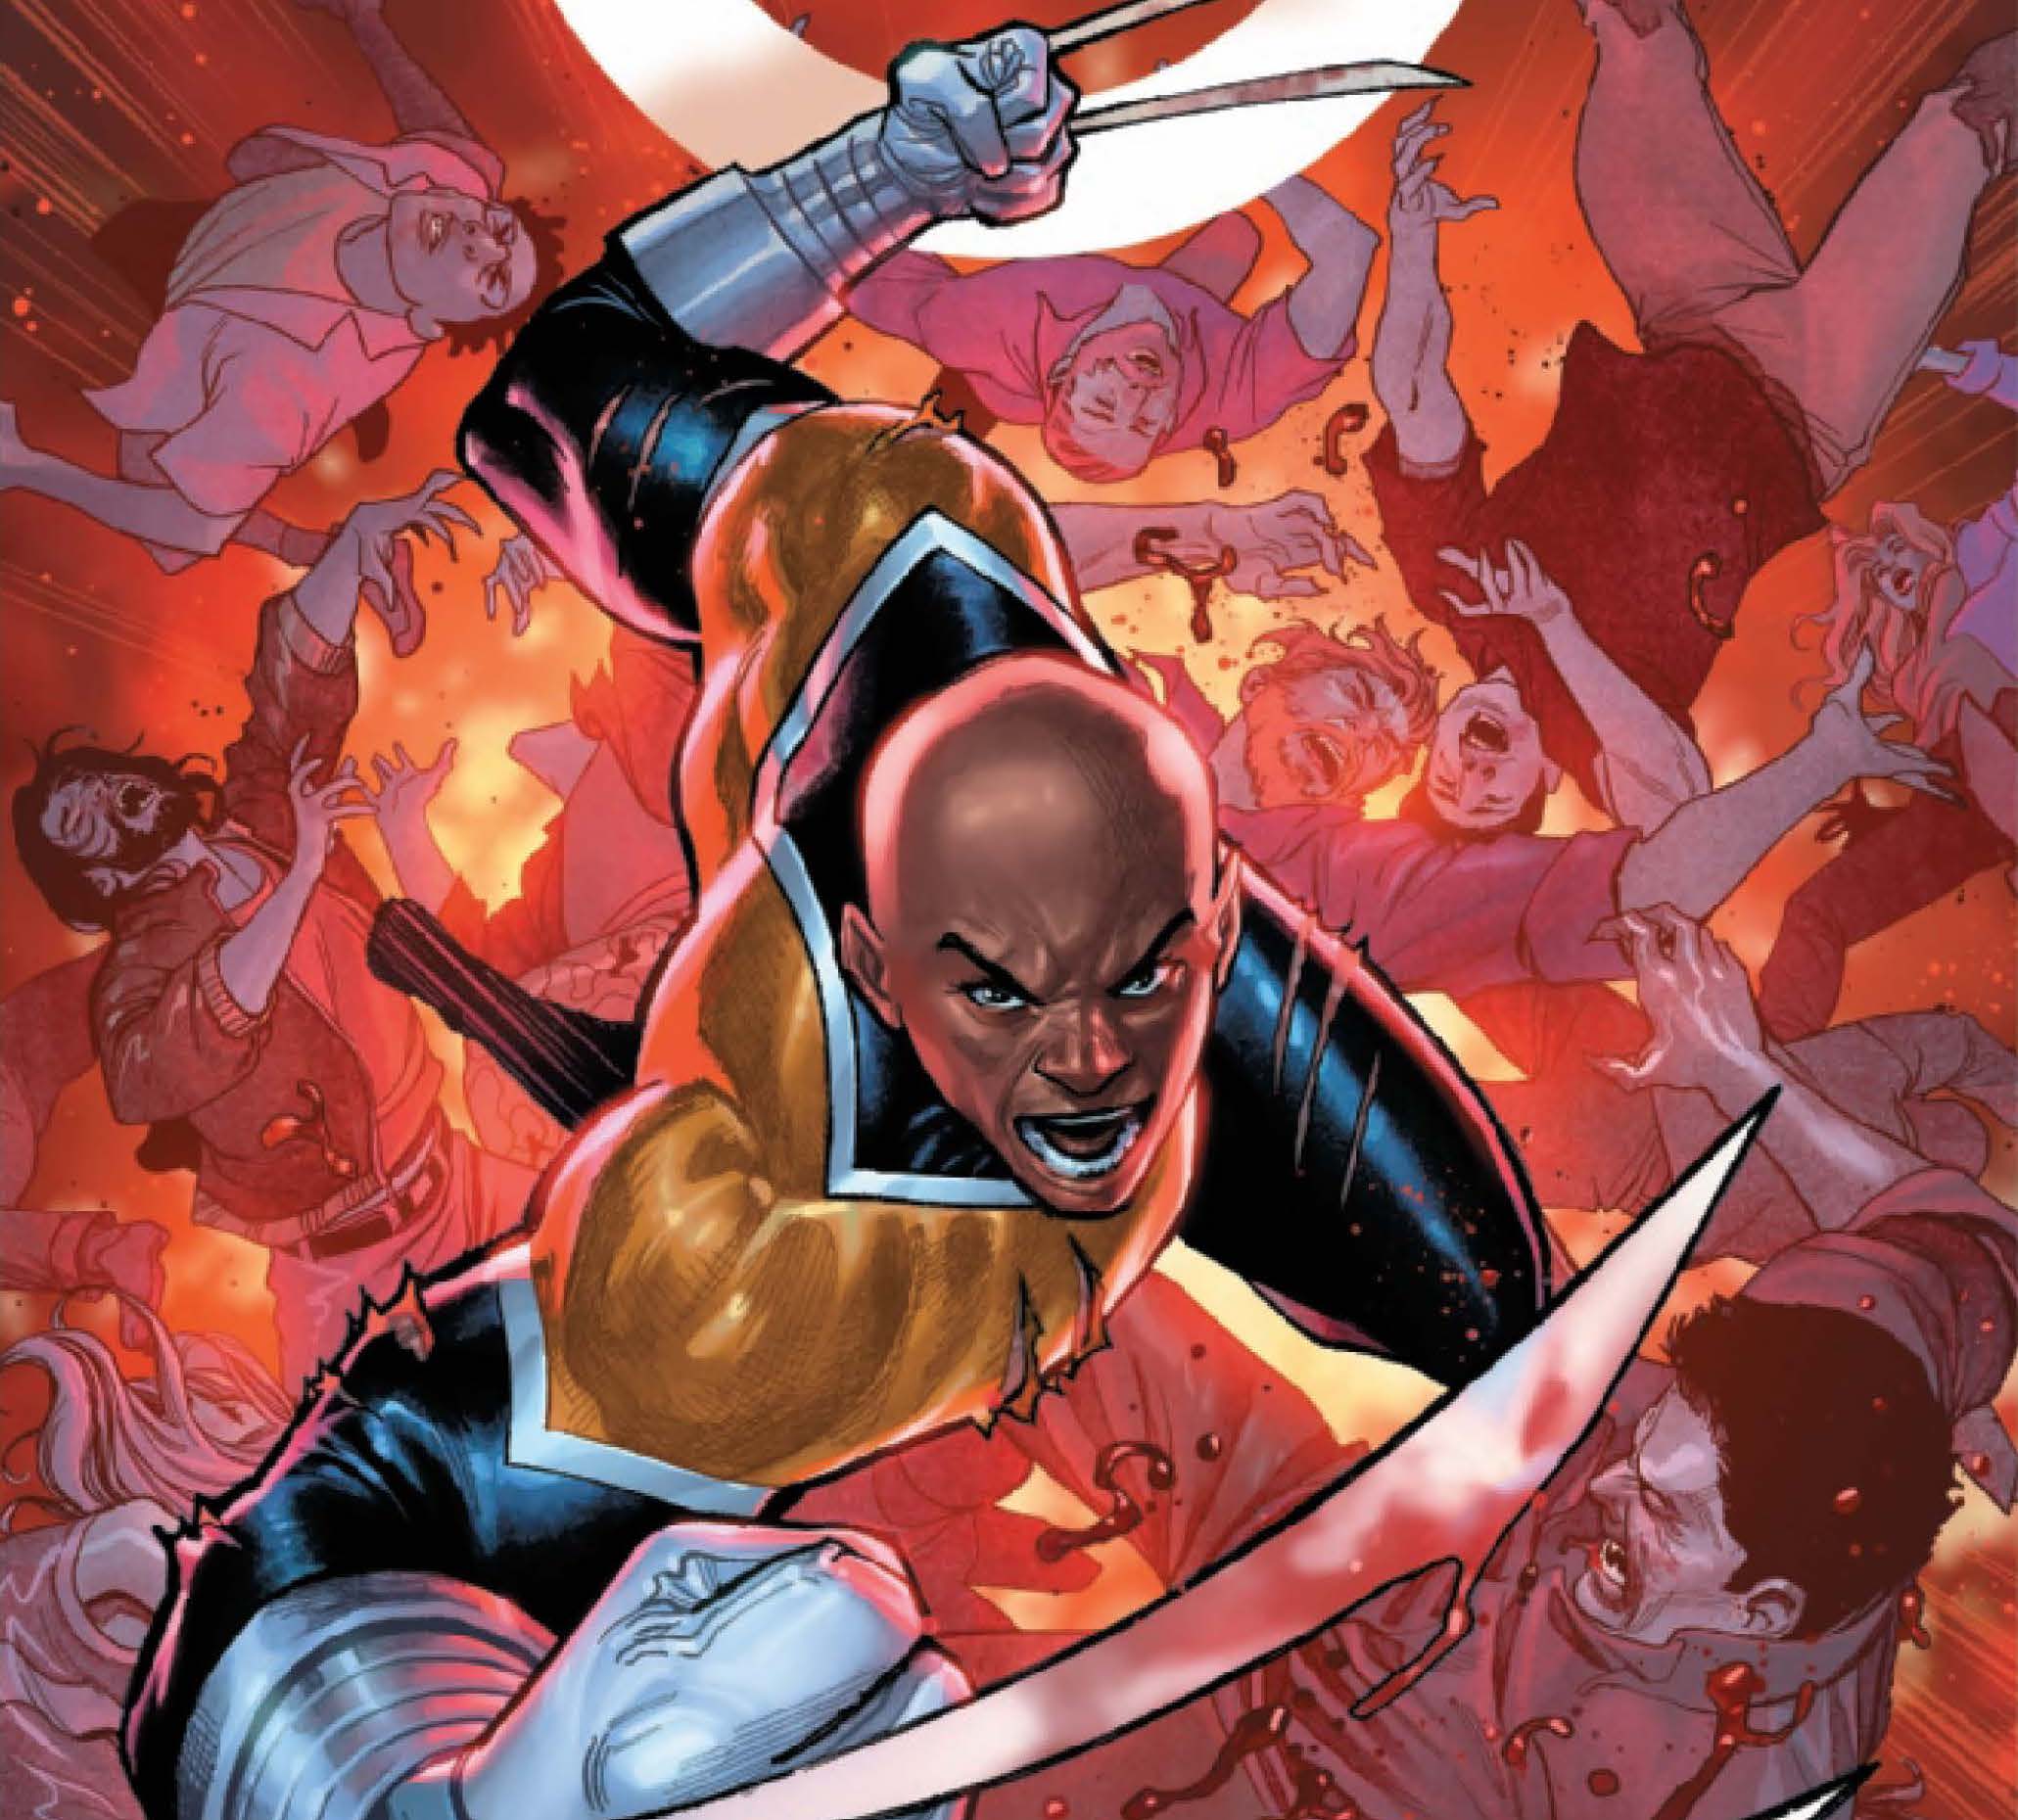 'X-Men' #18 clears the air between old and young Wolverine